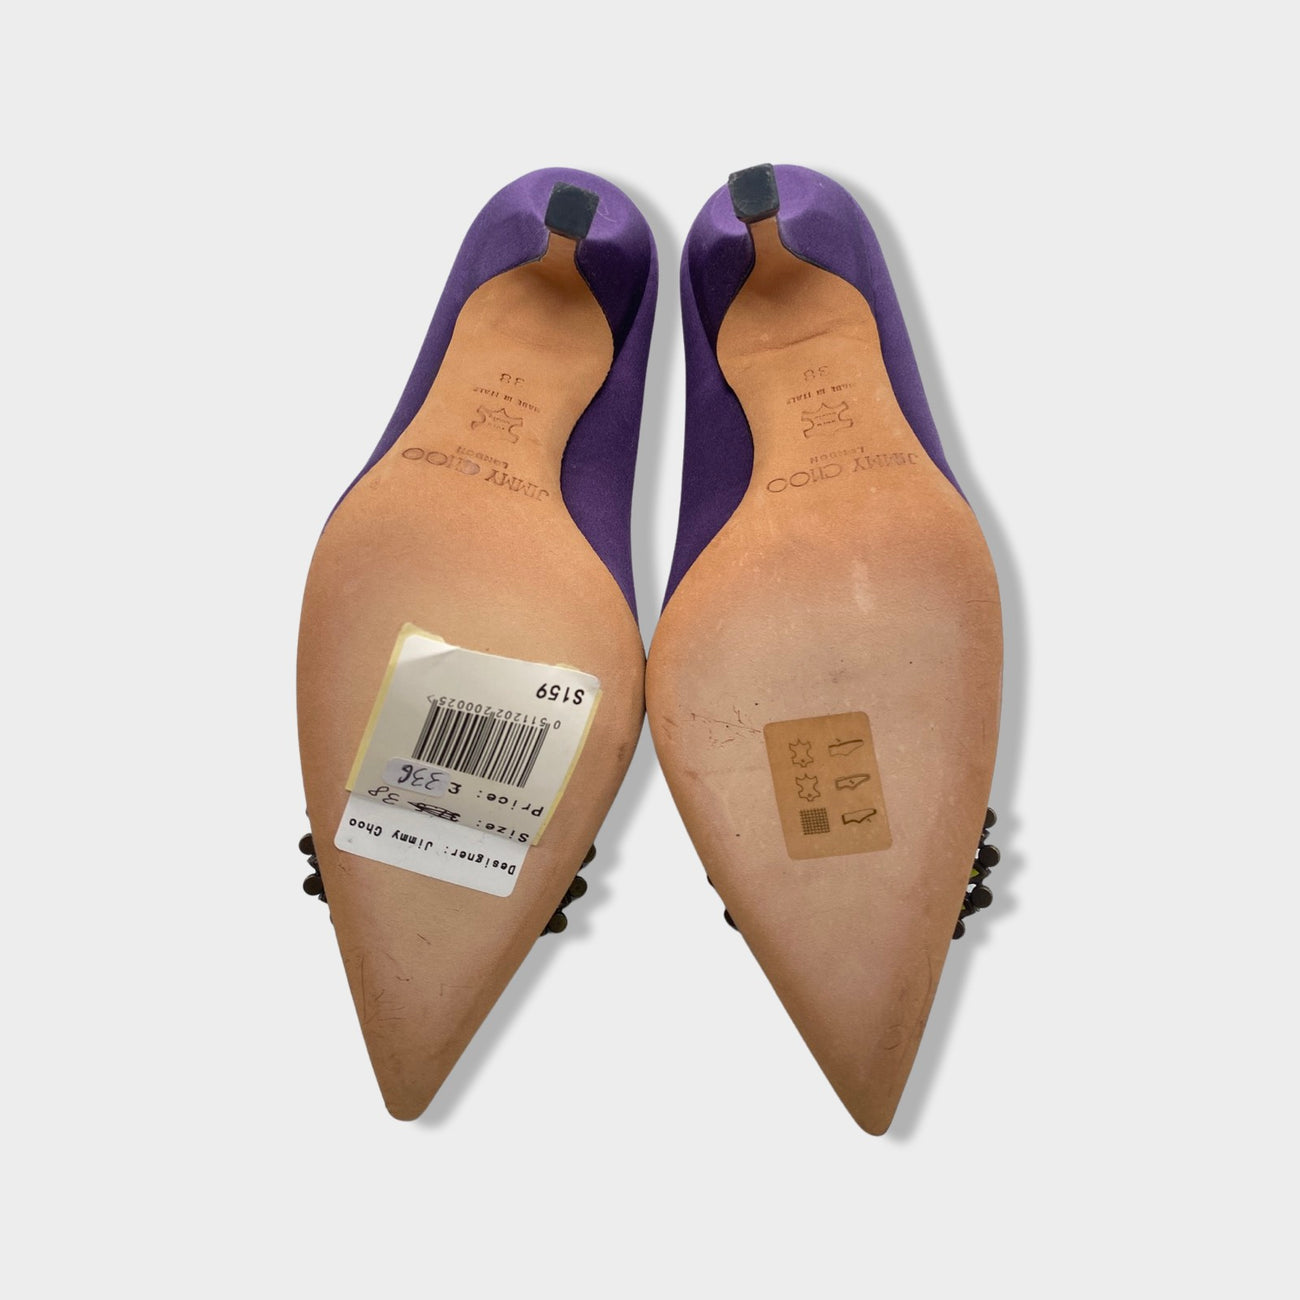 Romy 100 pumps By Jimmy Choo | Sandals | Browns Fashion | Jimmy choo heels, Purple  heels, Pumps heels stilettos